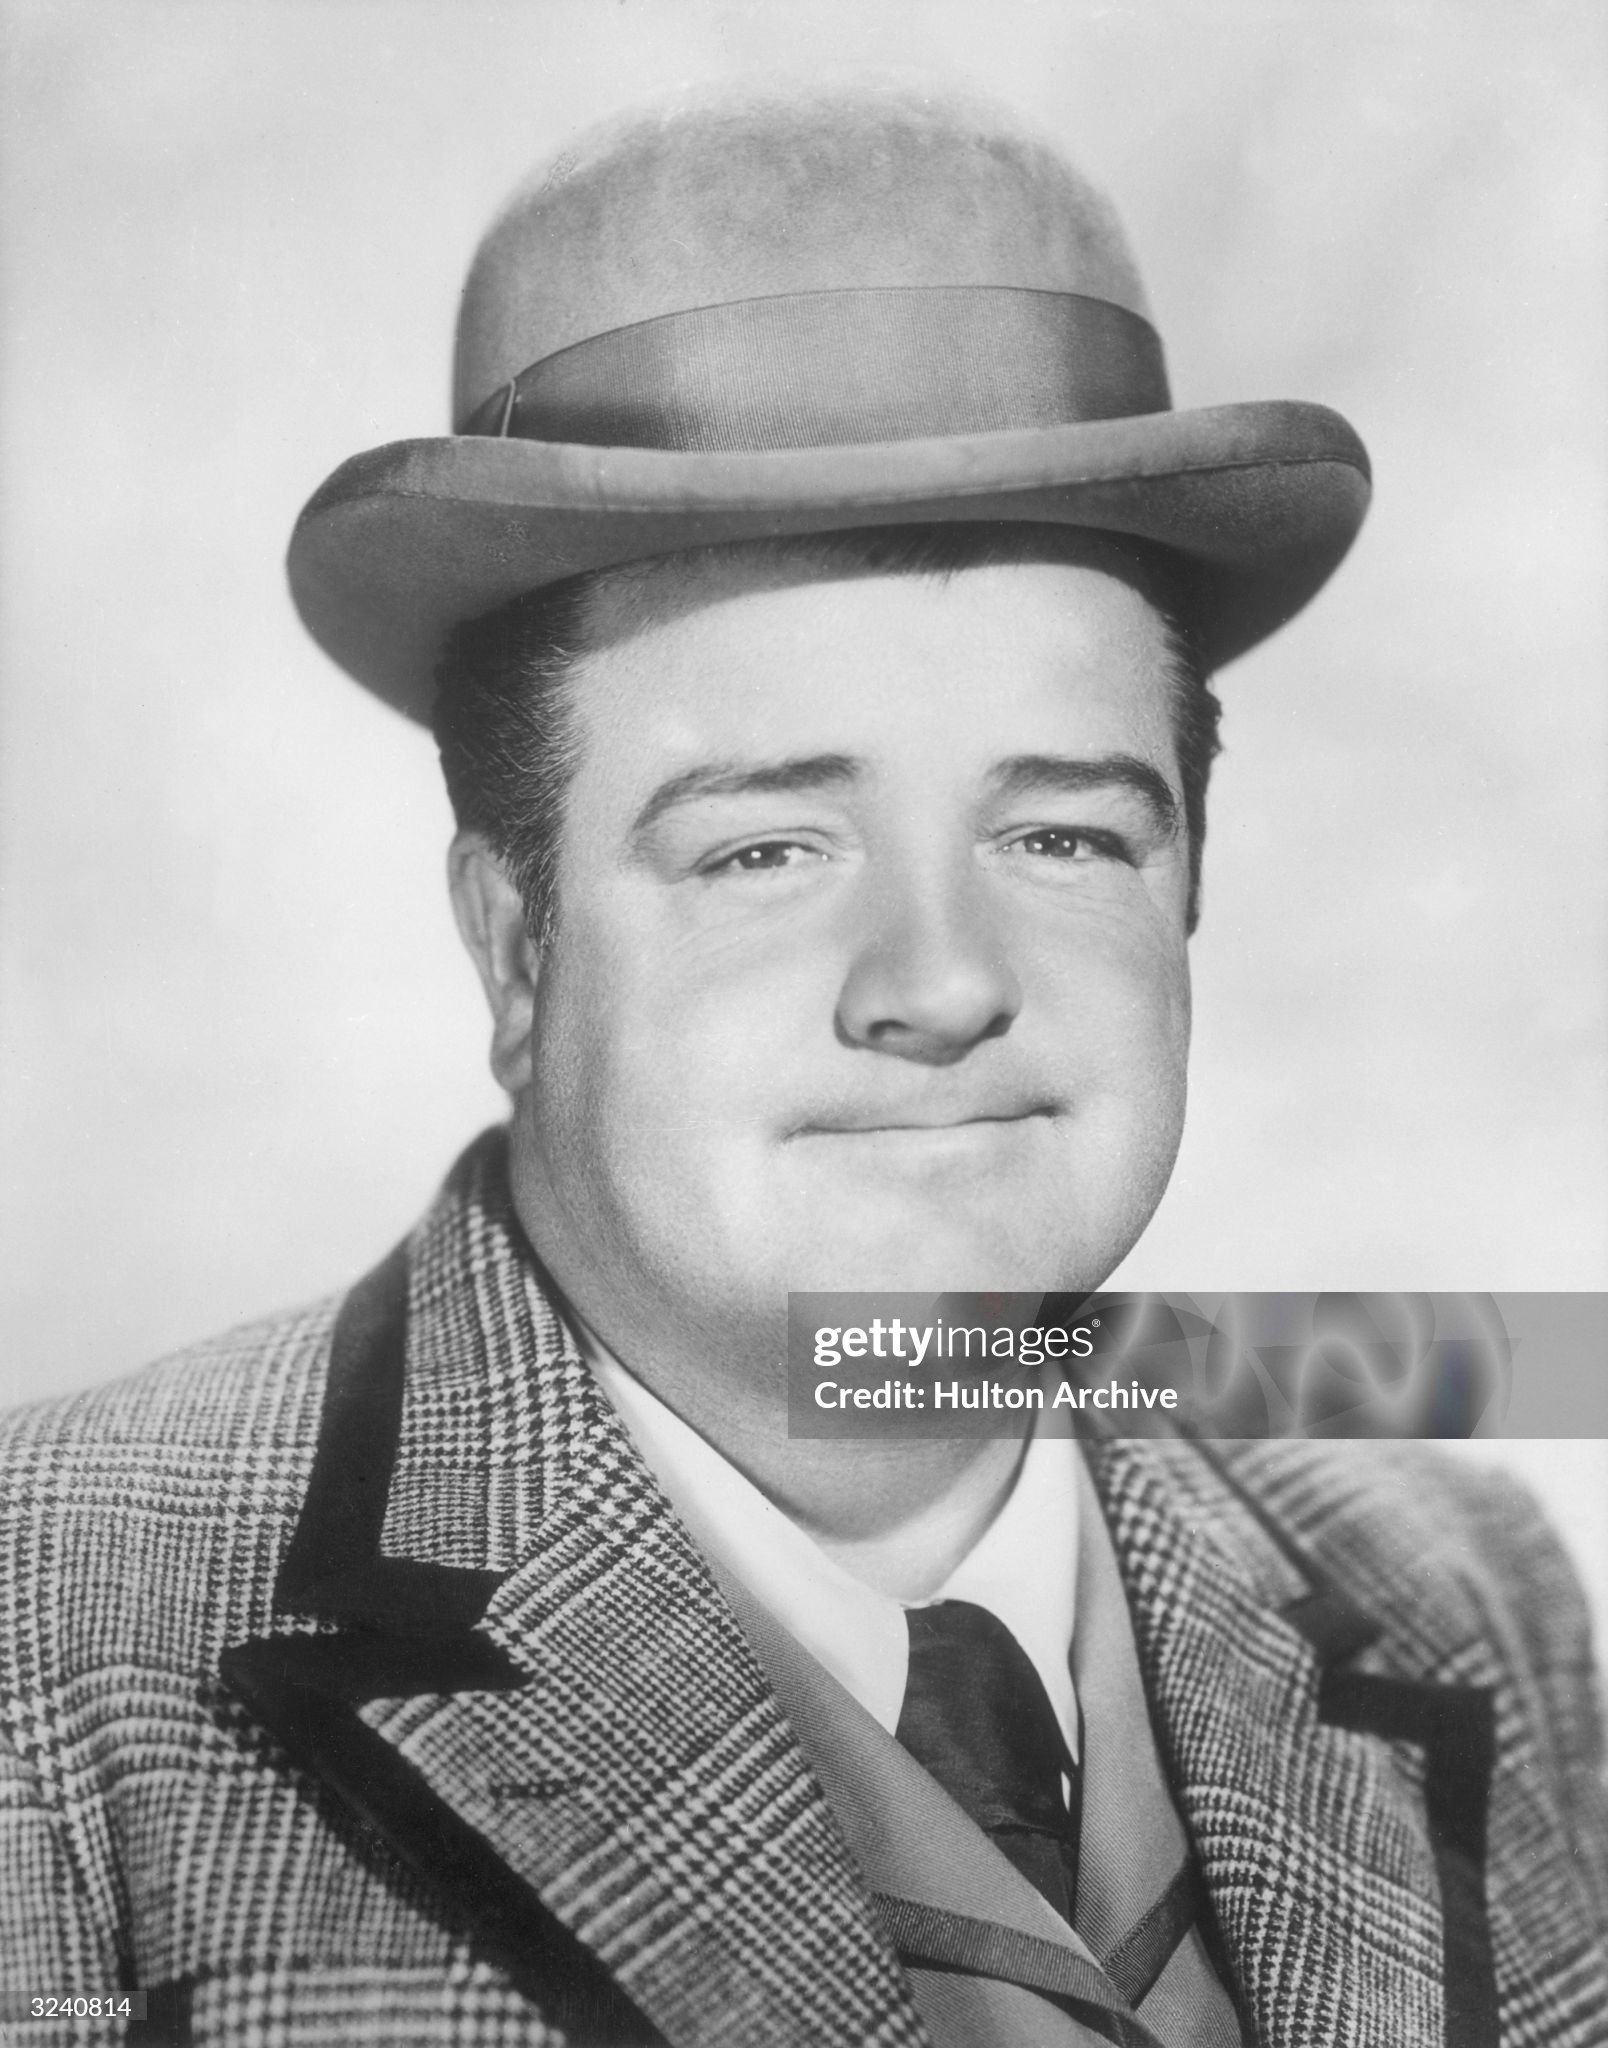 ¿Cuánto mide Lou Costello? - Altura - Reight height Studio-headshot-portrait-of-american-actor-and-comedian-lou-costello-grinning-wearing-a-bowler